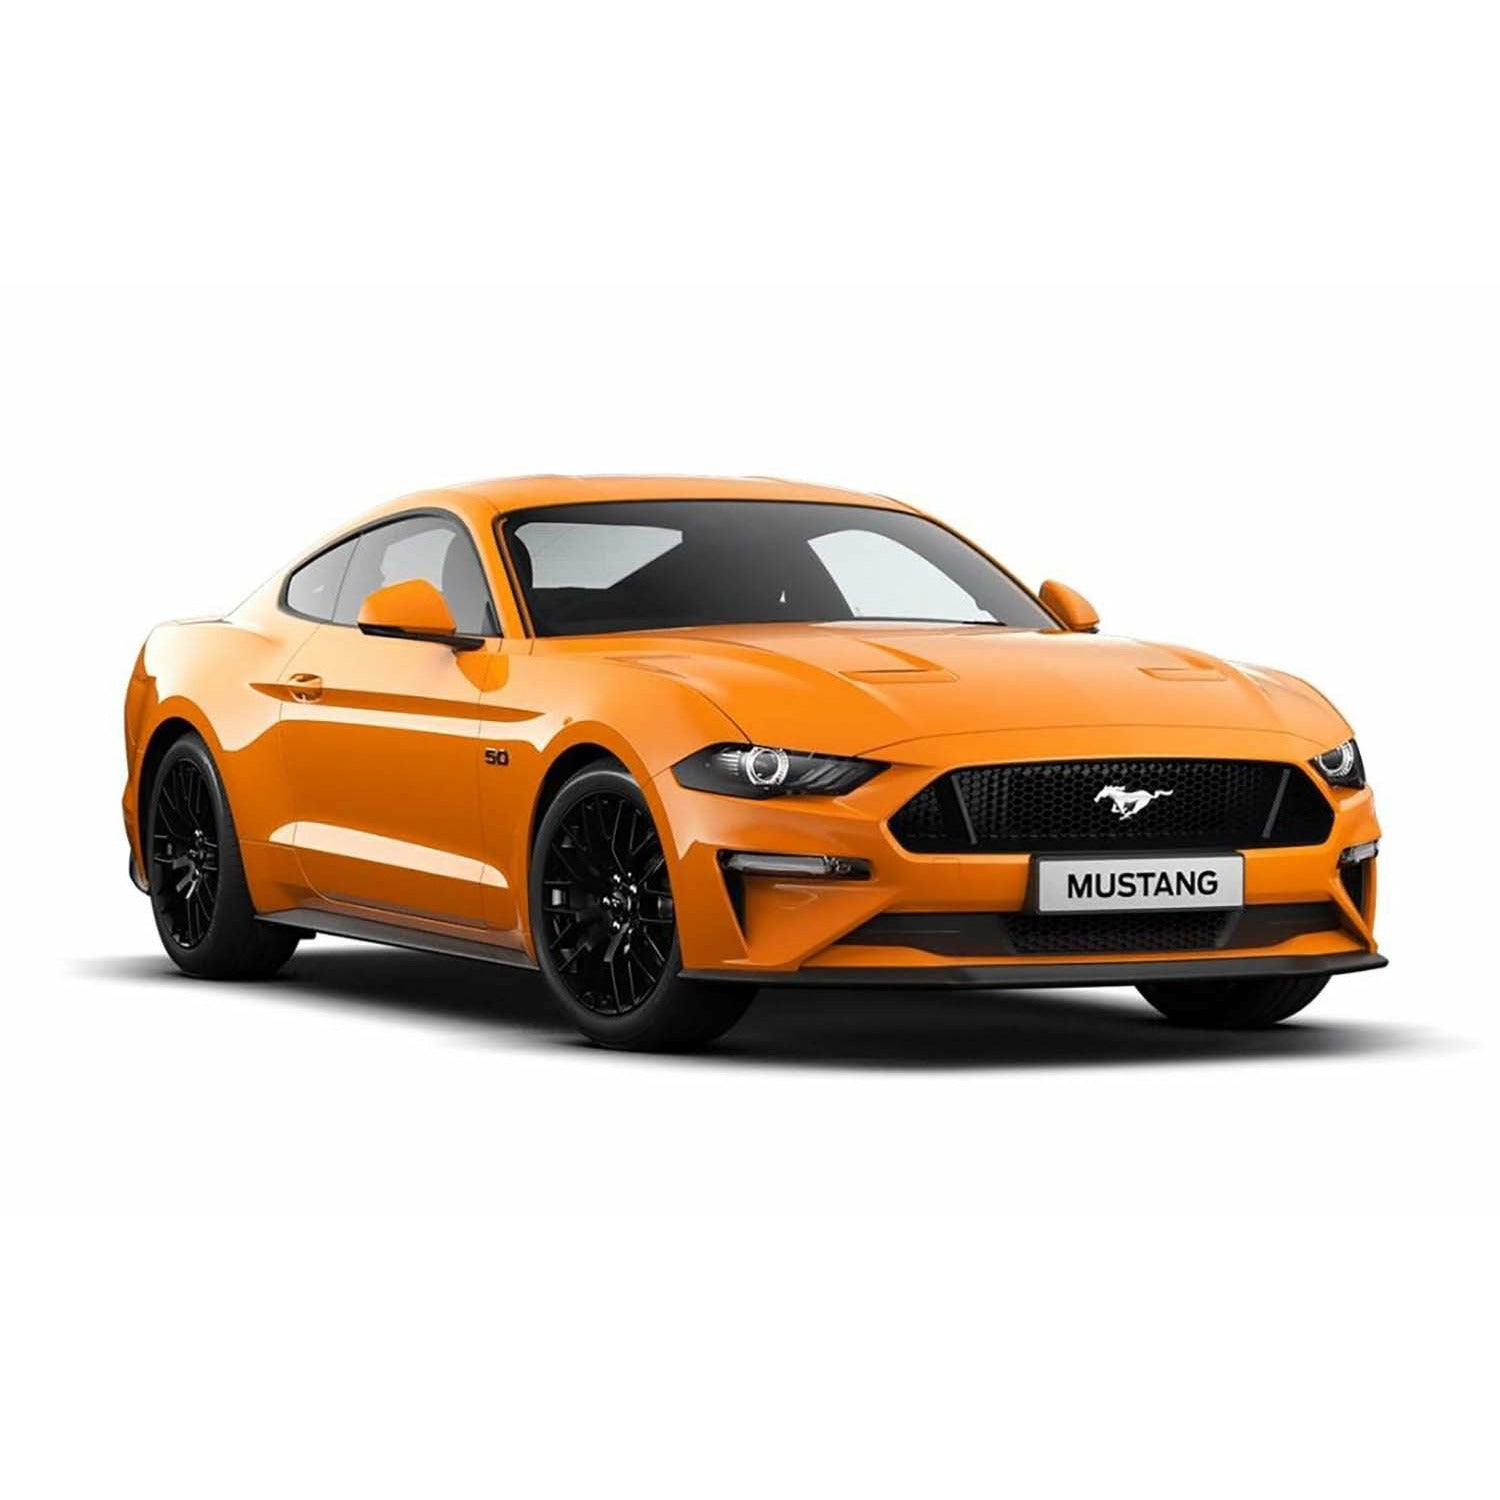 Ford Mustang GT 1/24 Quick Build Car Kit #J6036 by Airfix